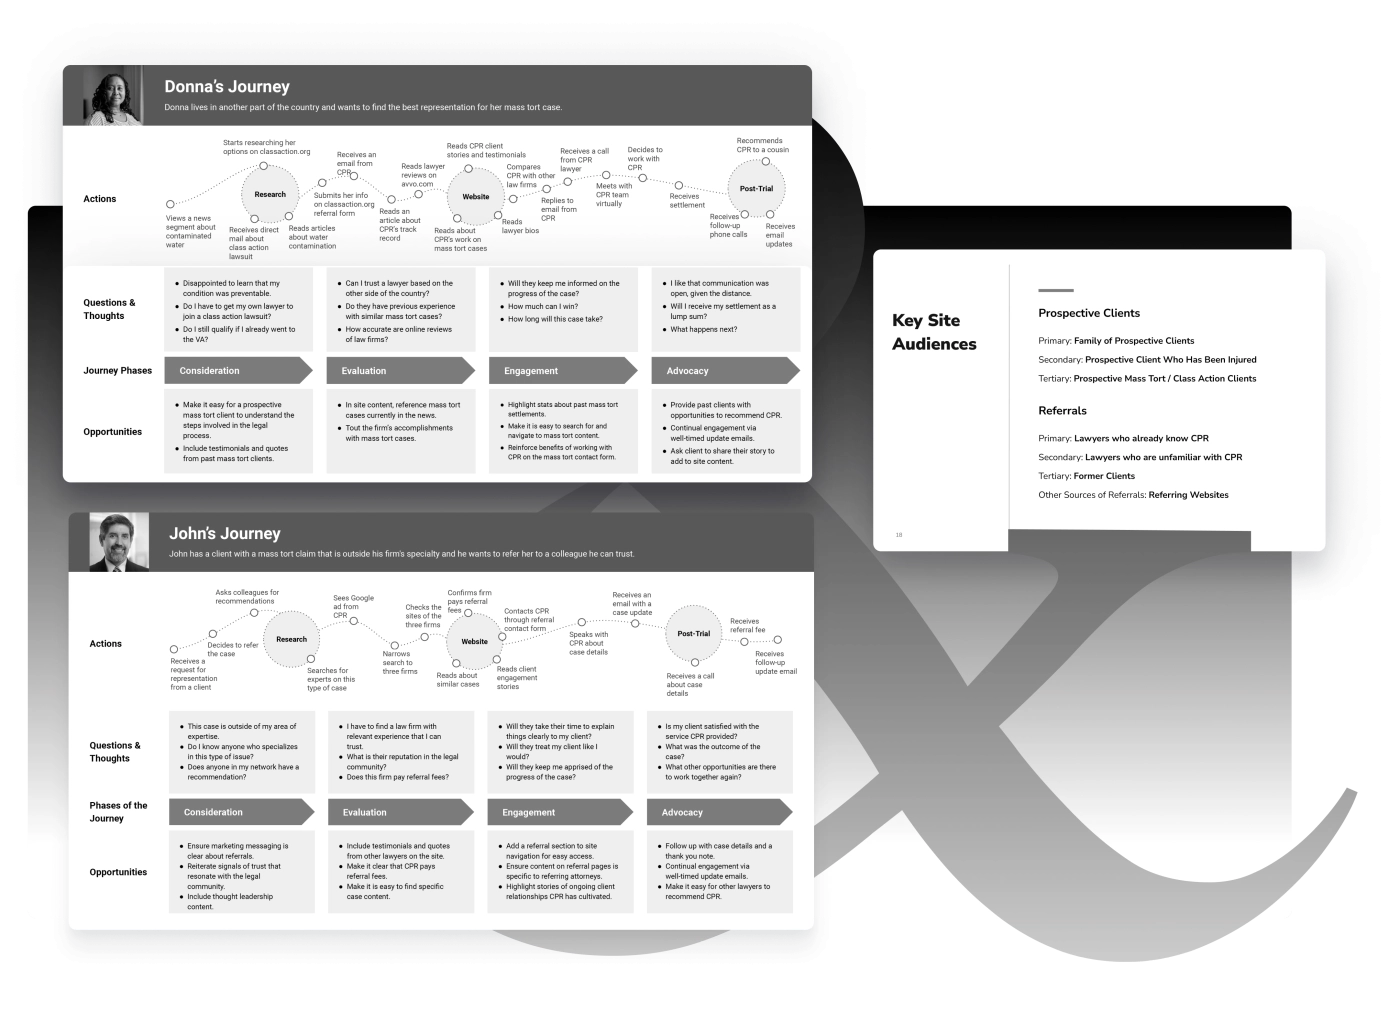 User Journey analysis by Eastern Standard delivered to CPR creating extensive user personas to define relevant audiences and appropriate content to create for each persona identified.